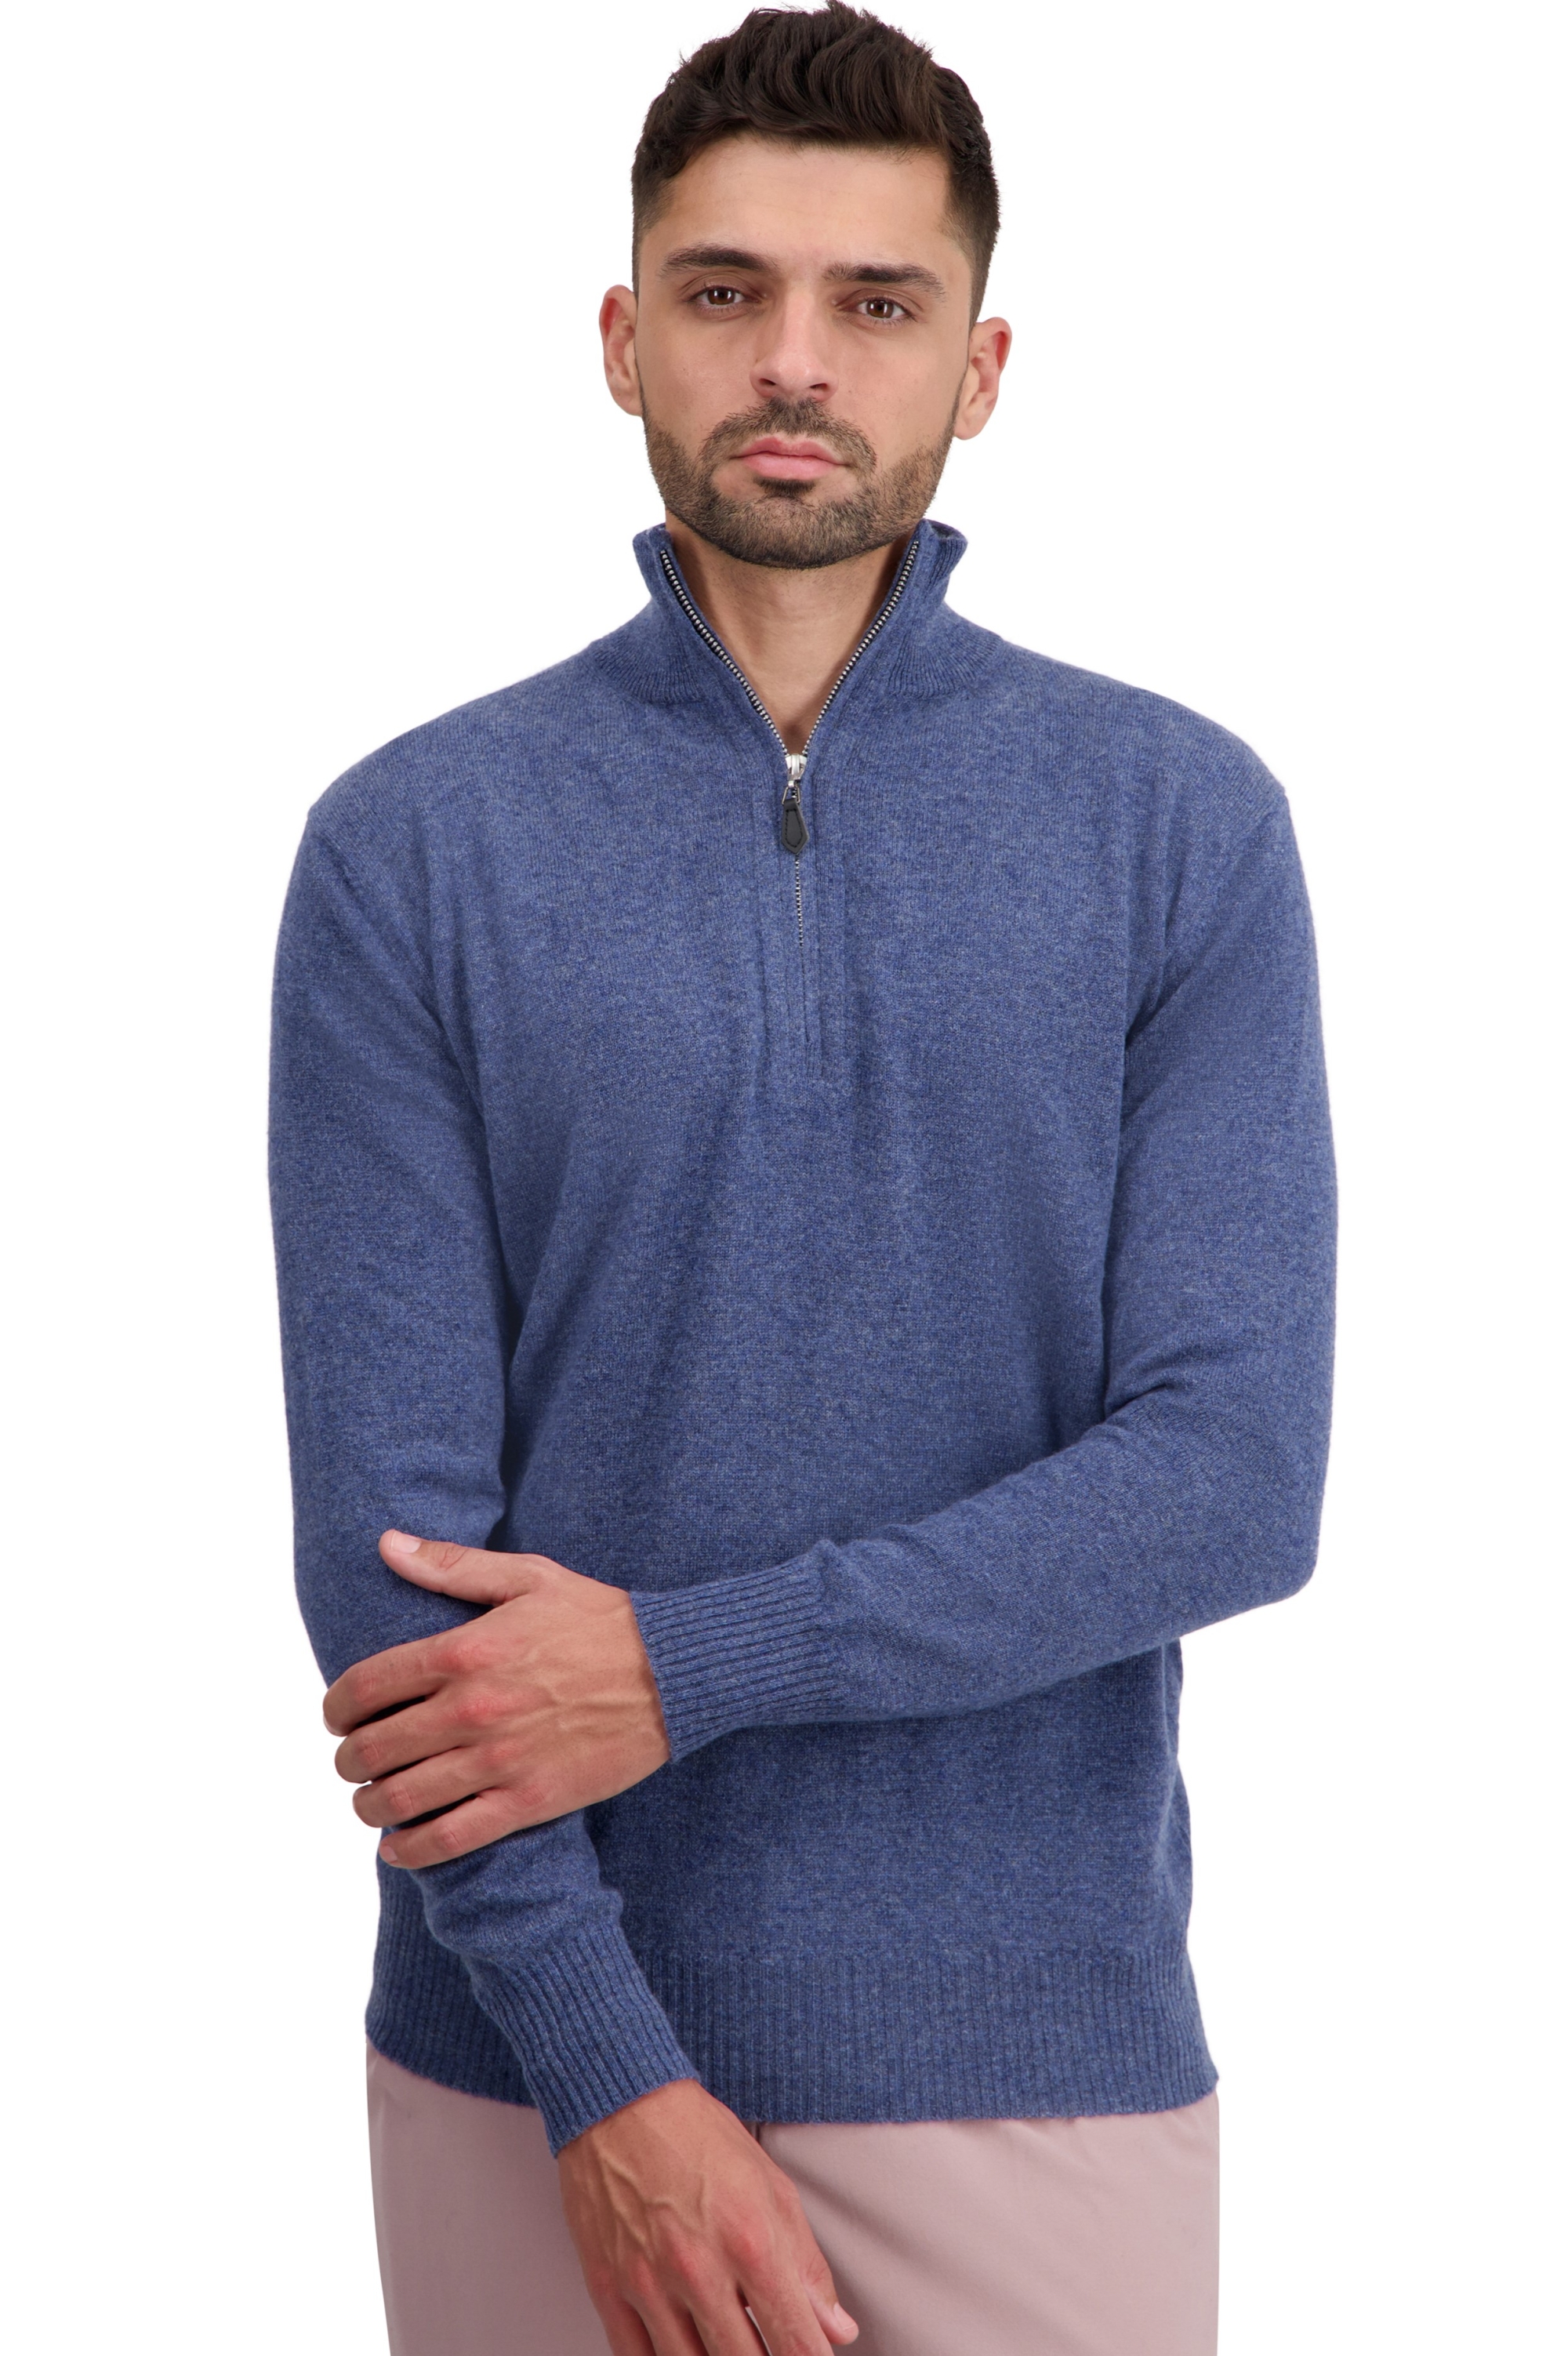 Cachemire pull homme toulon first nordic blue xl